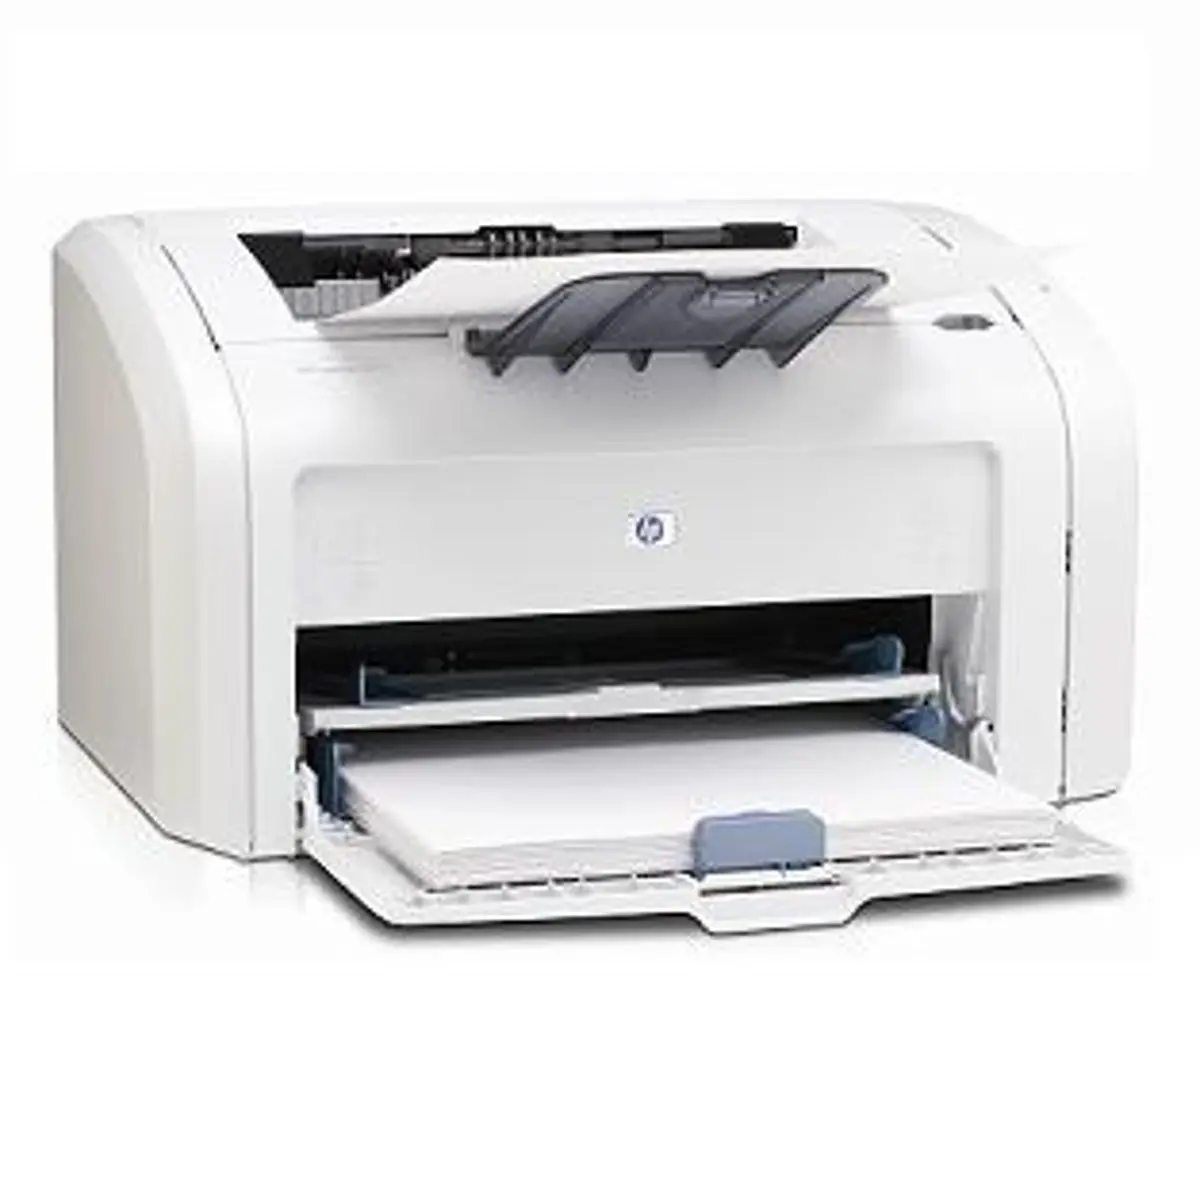 Hp laserjet 1018: reliable printing solution for home and business